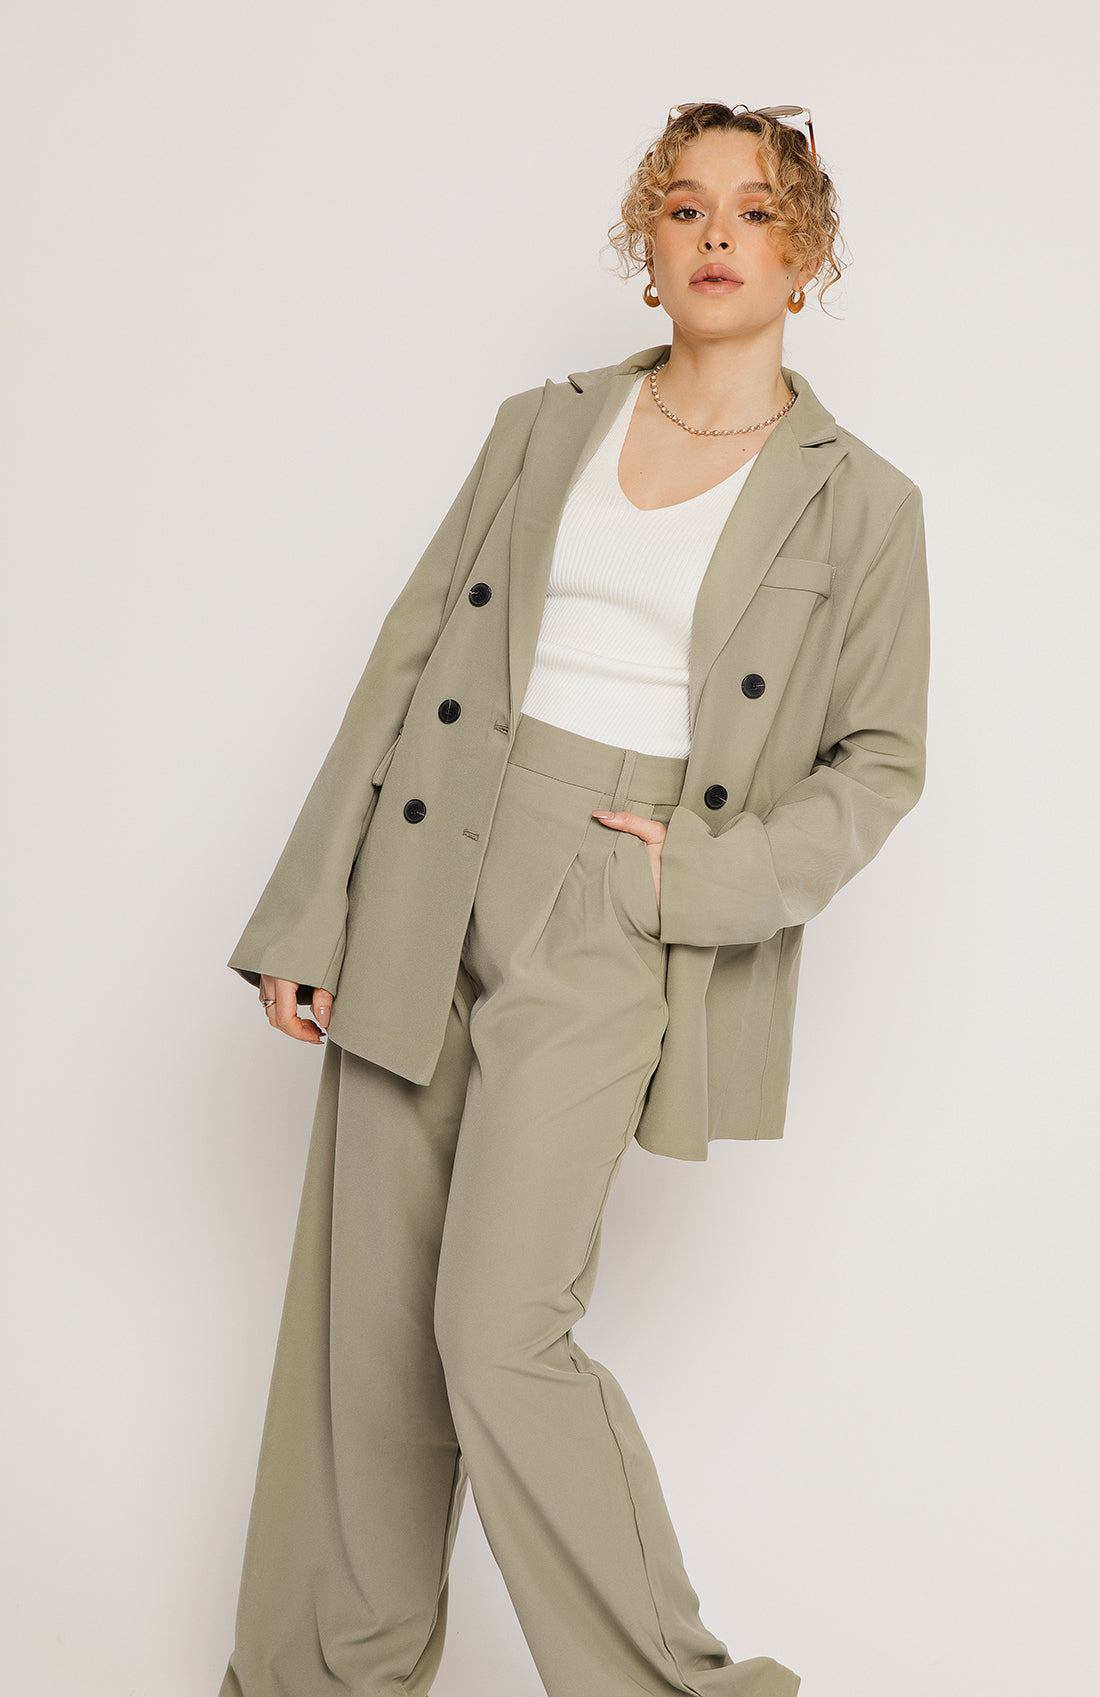 Everleigh Green Suit Jacket - Sugar + Style